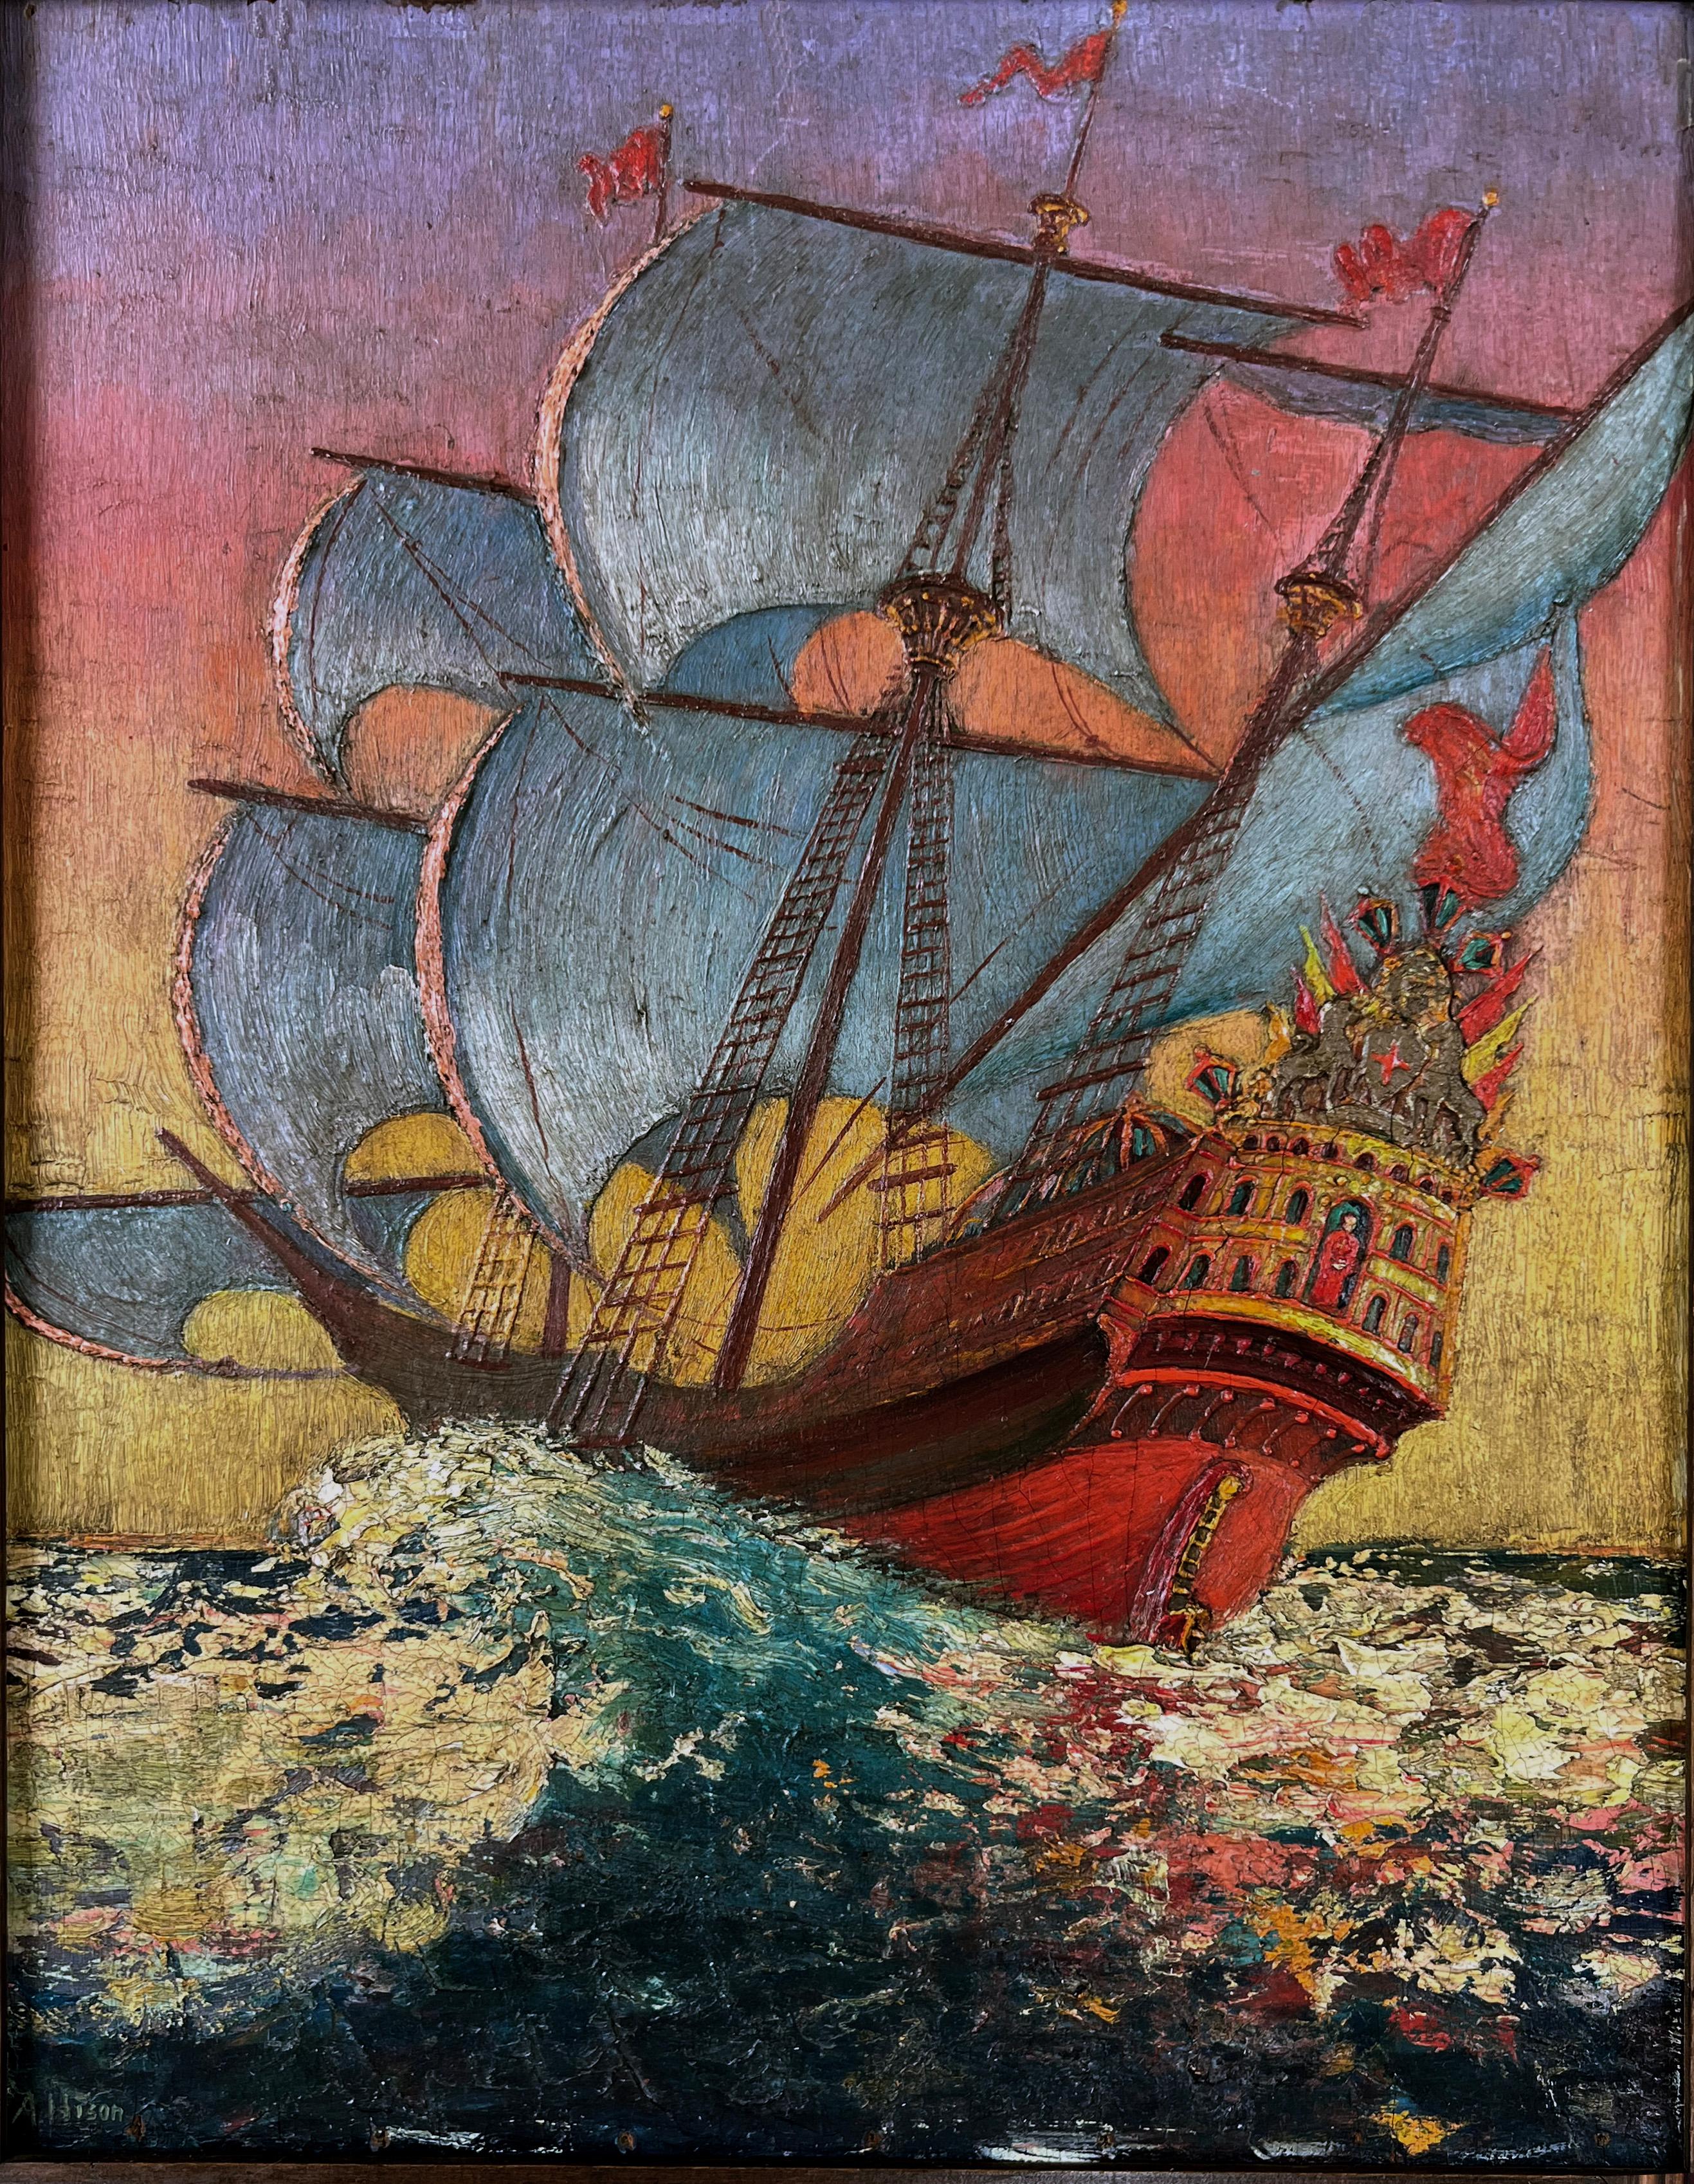 A Spanish Galleon in the Tropics in High Seas Oil Impasto on Panel
An exceptionally detailed oil impasto on wood panel of a Spanish Galleon by unknown artist Allison (American 19-20th Century). Many banners and Flags adorned this Galleon and a red